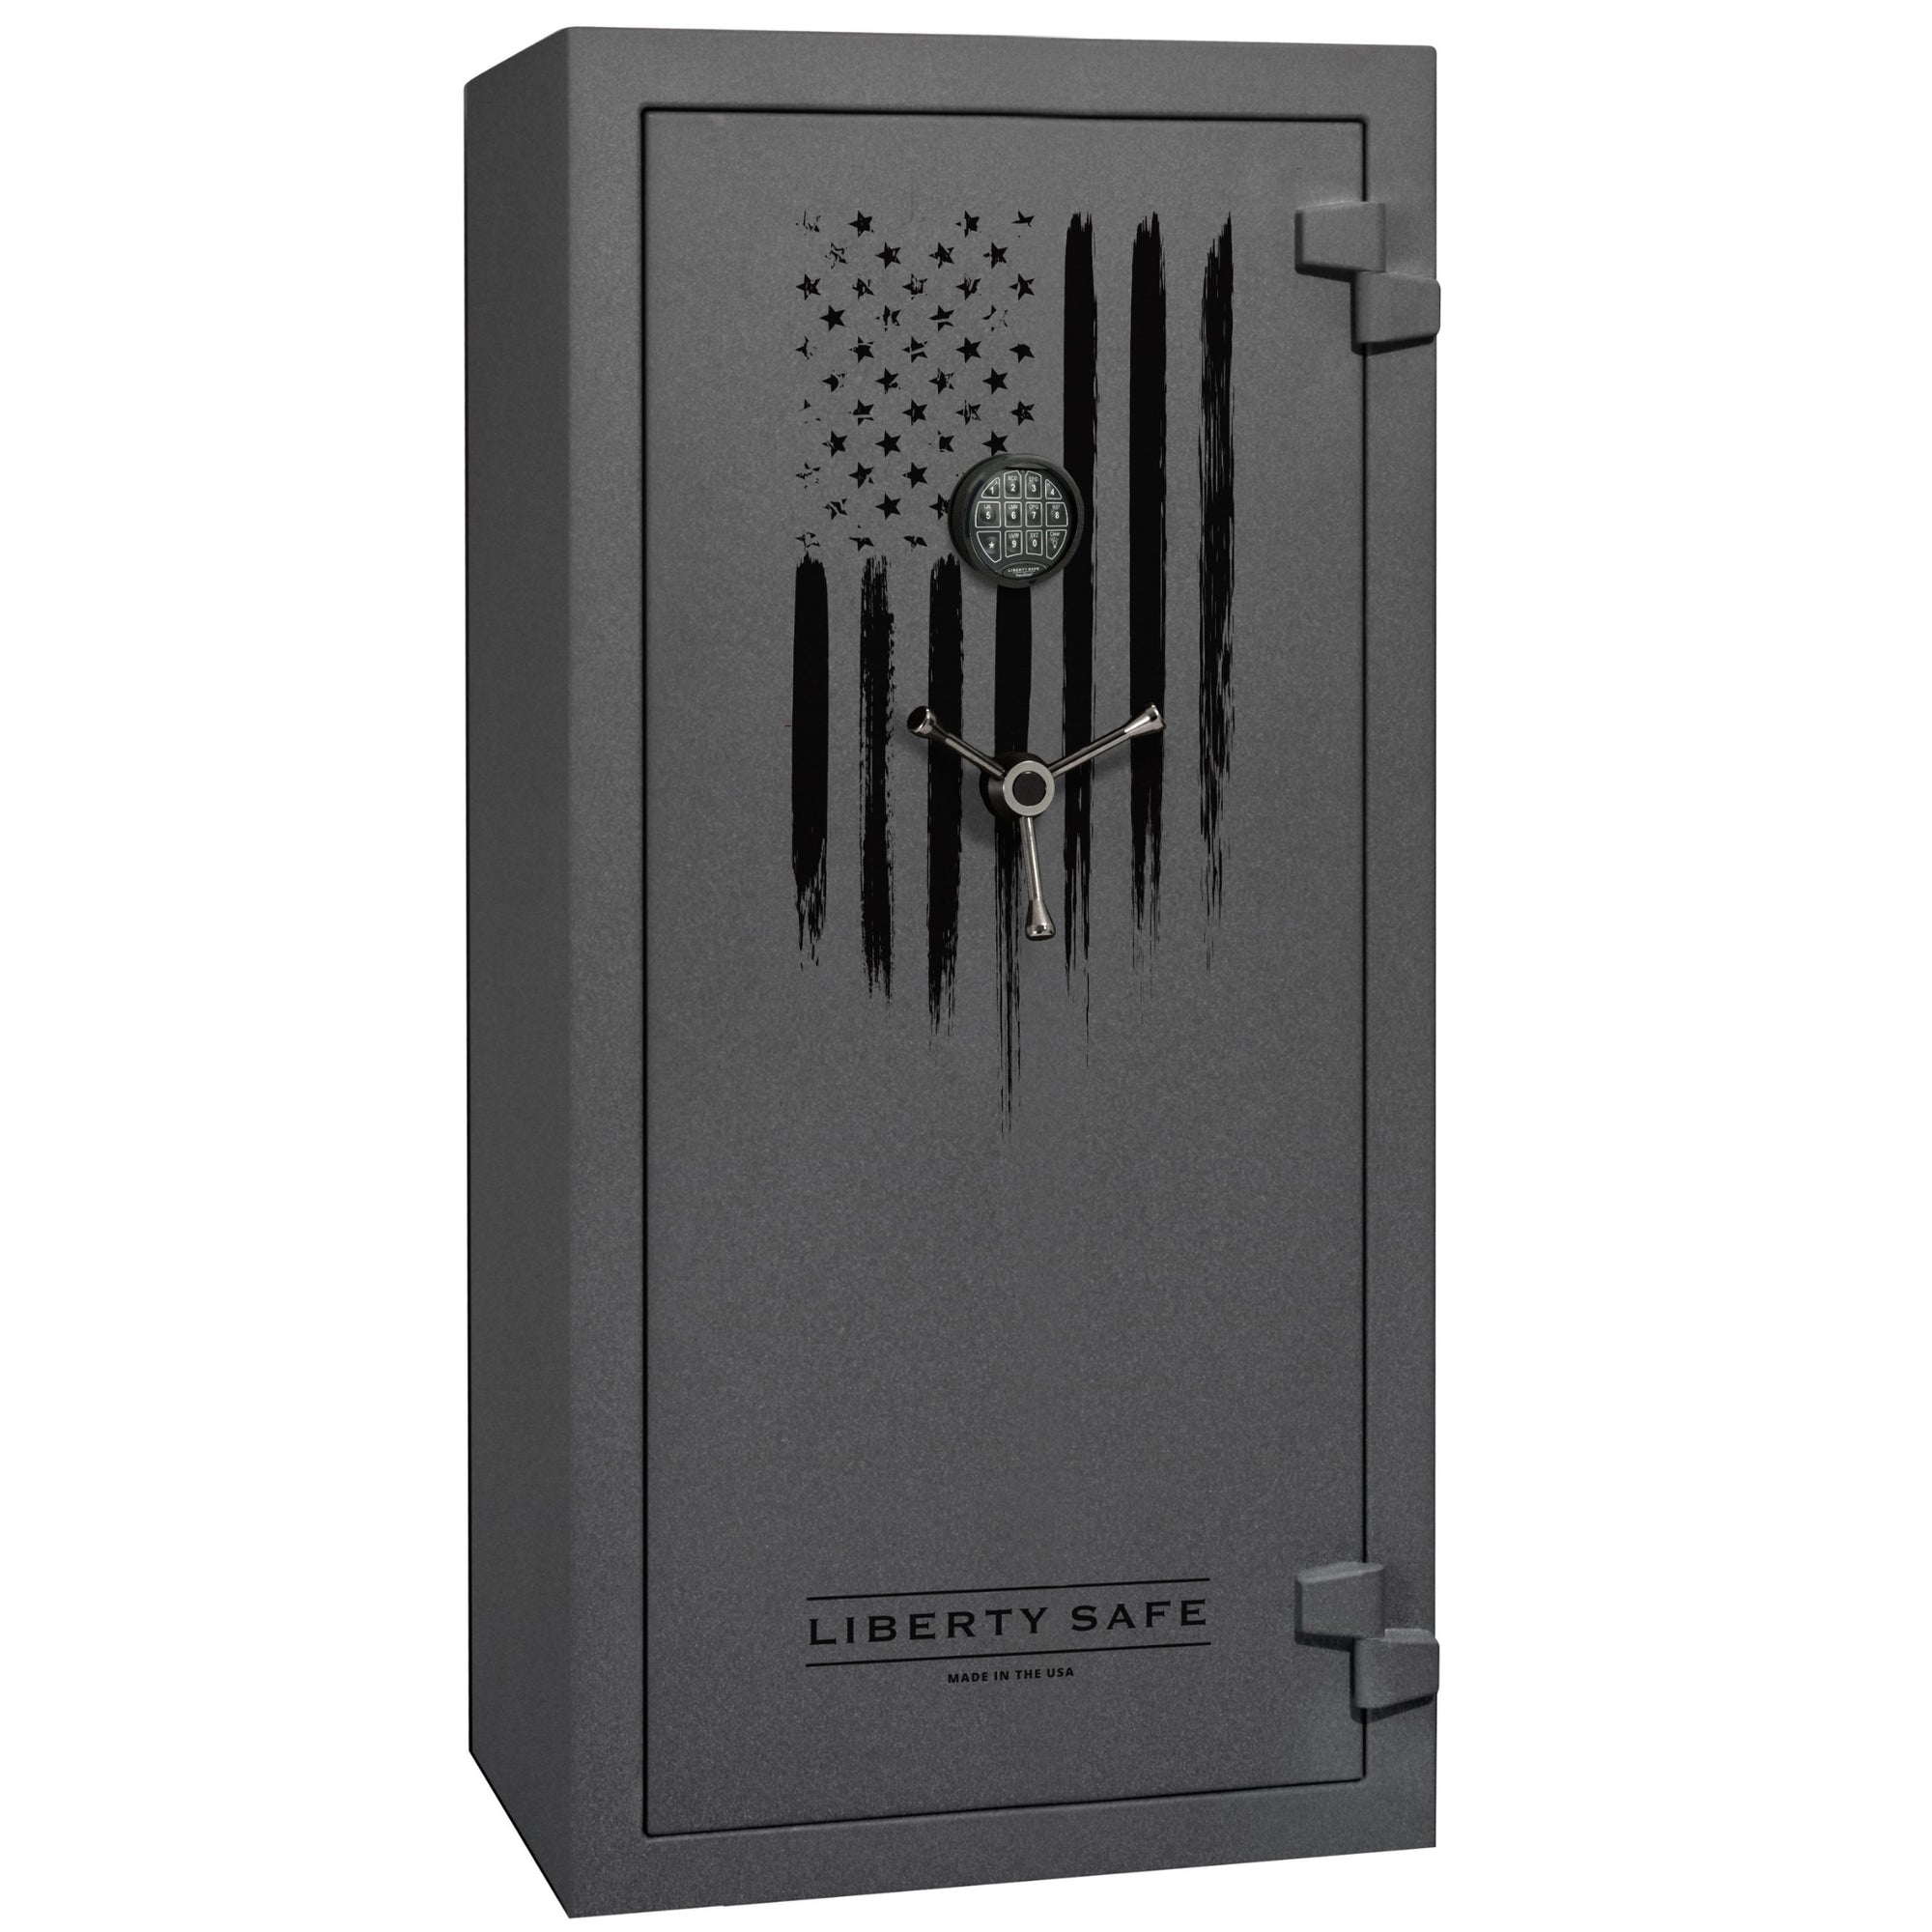 Centurion 24 Granite Textured Flag Safe Promotion | Level 1 Security | 40 Minute Fire Protection | Dimensions: 59.5" H x 28.25" W x 20" D - Closed Door